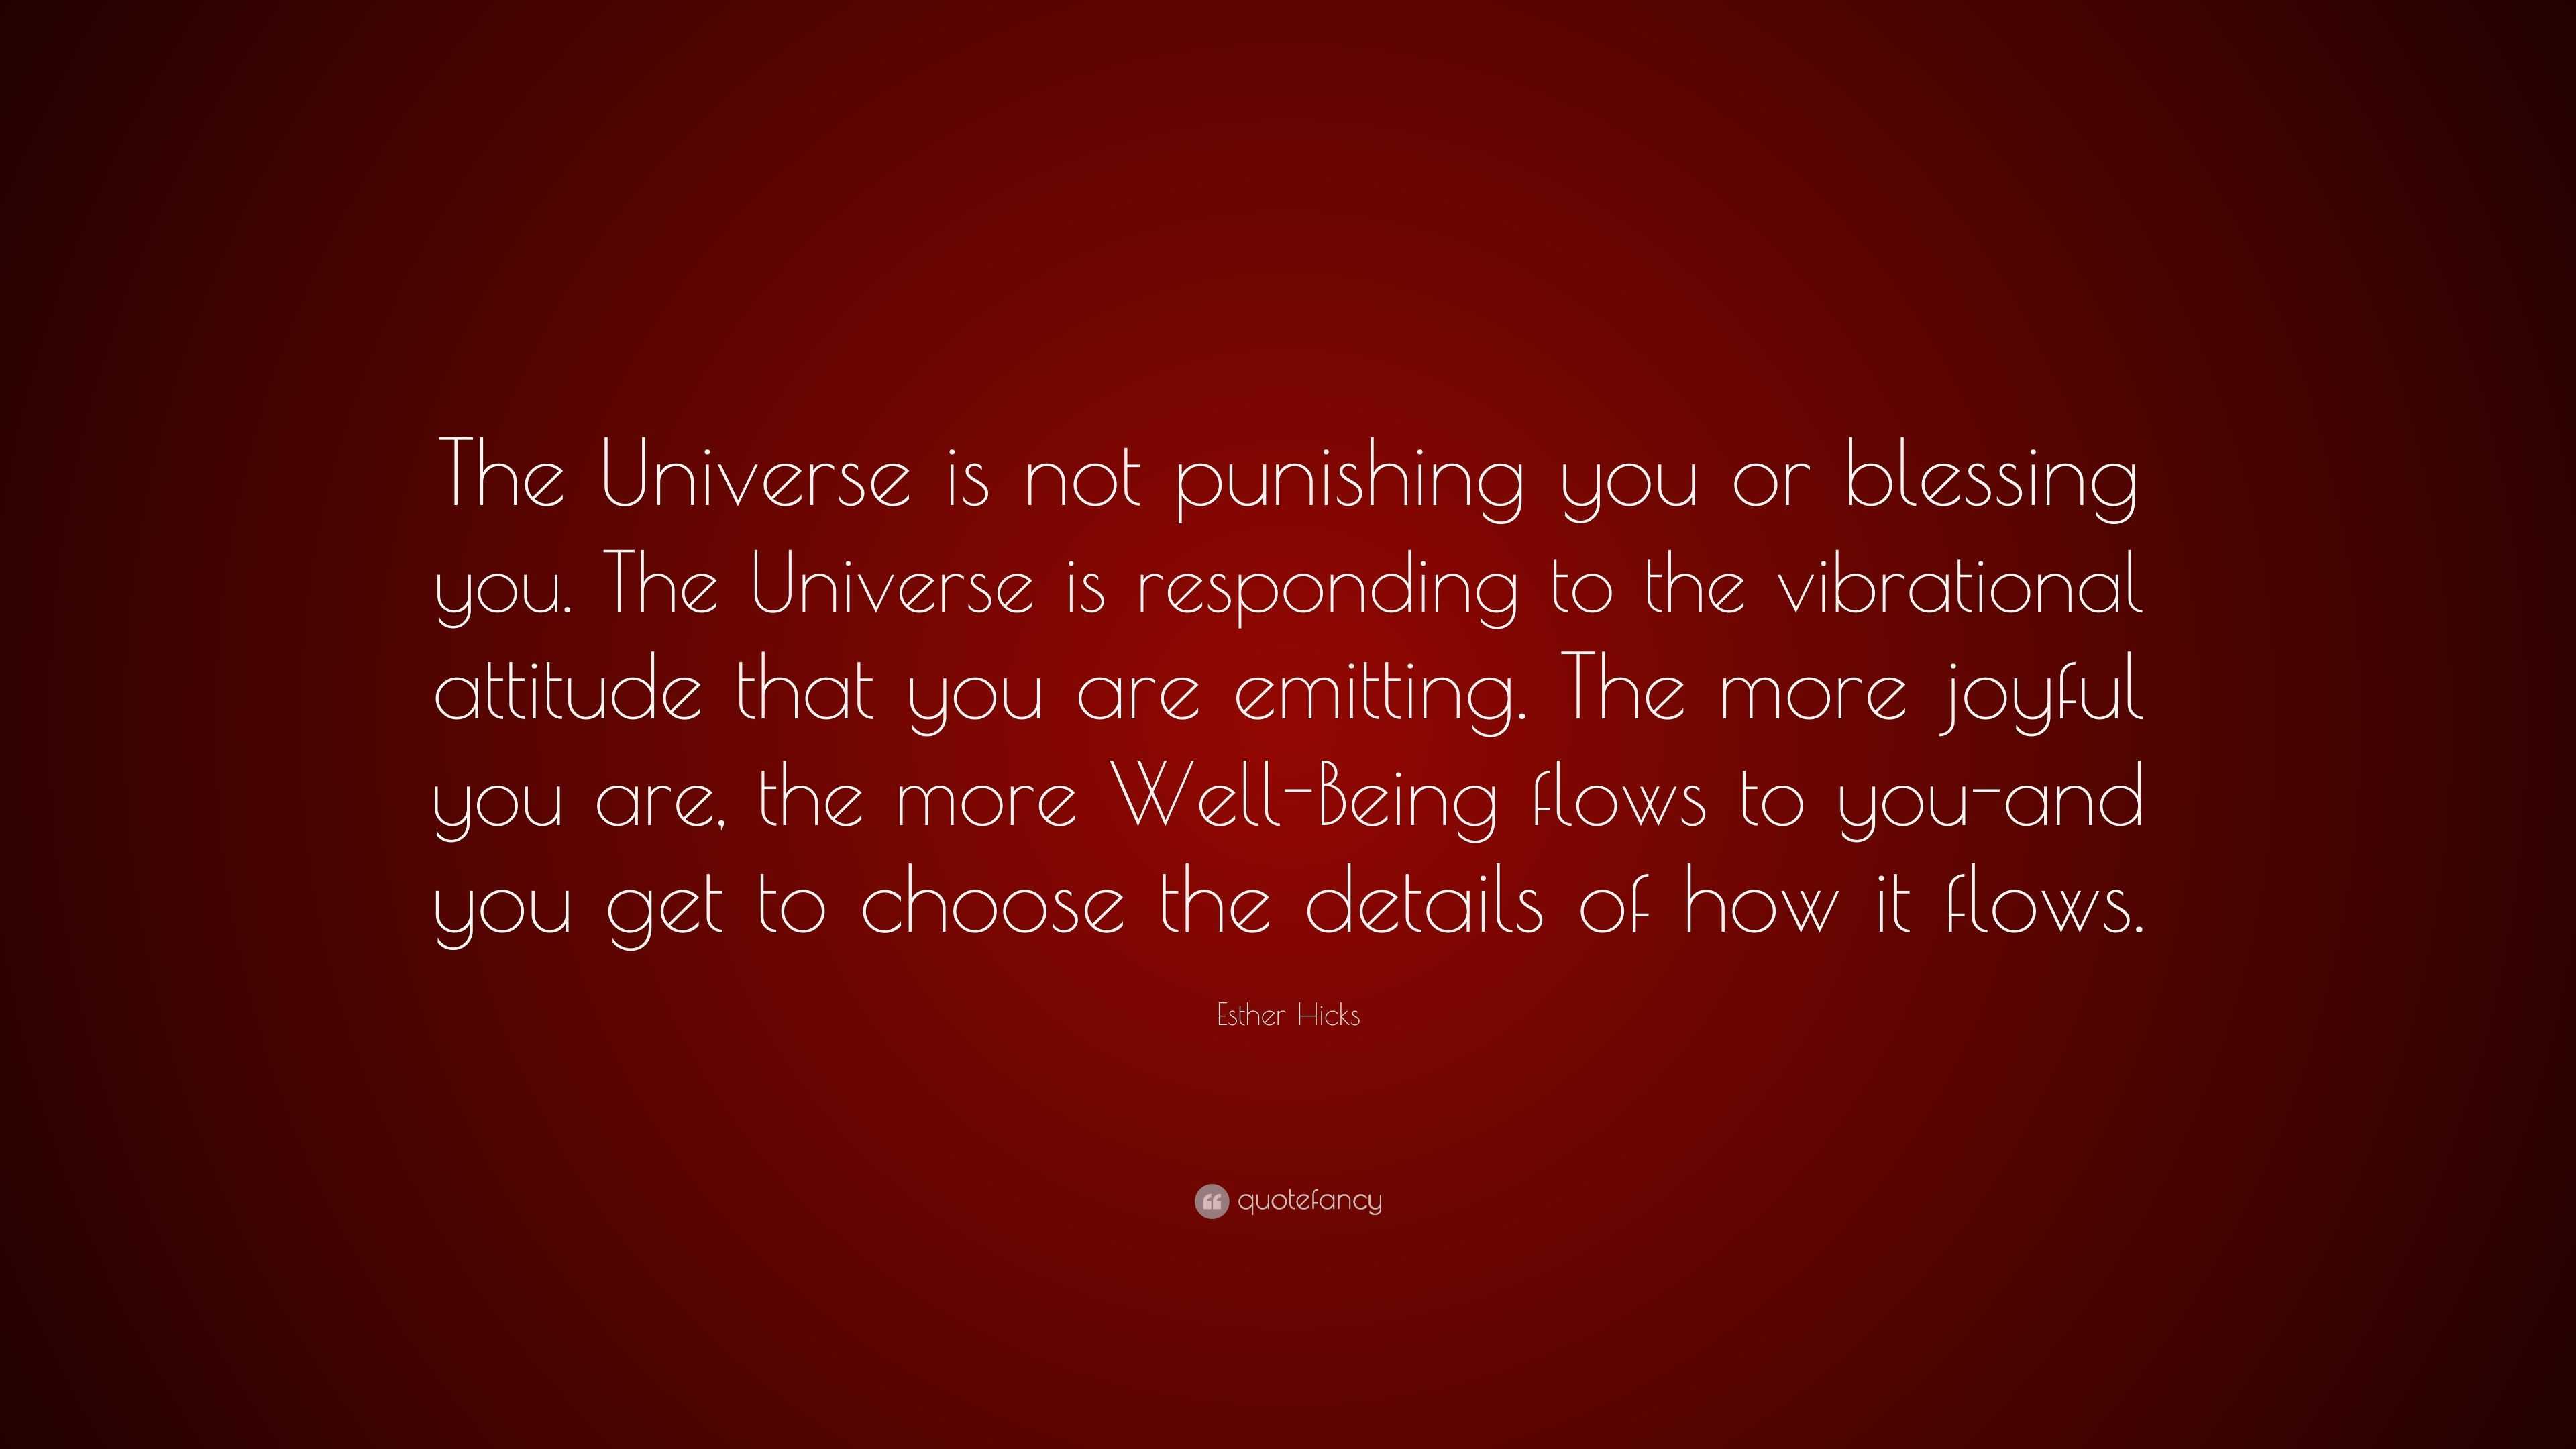 Esther Hicks Quote: “The Universe is not punishing you or blessing you ...